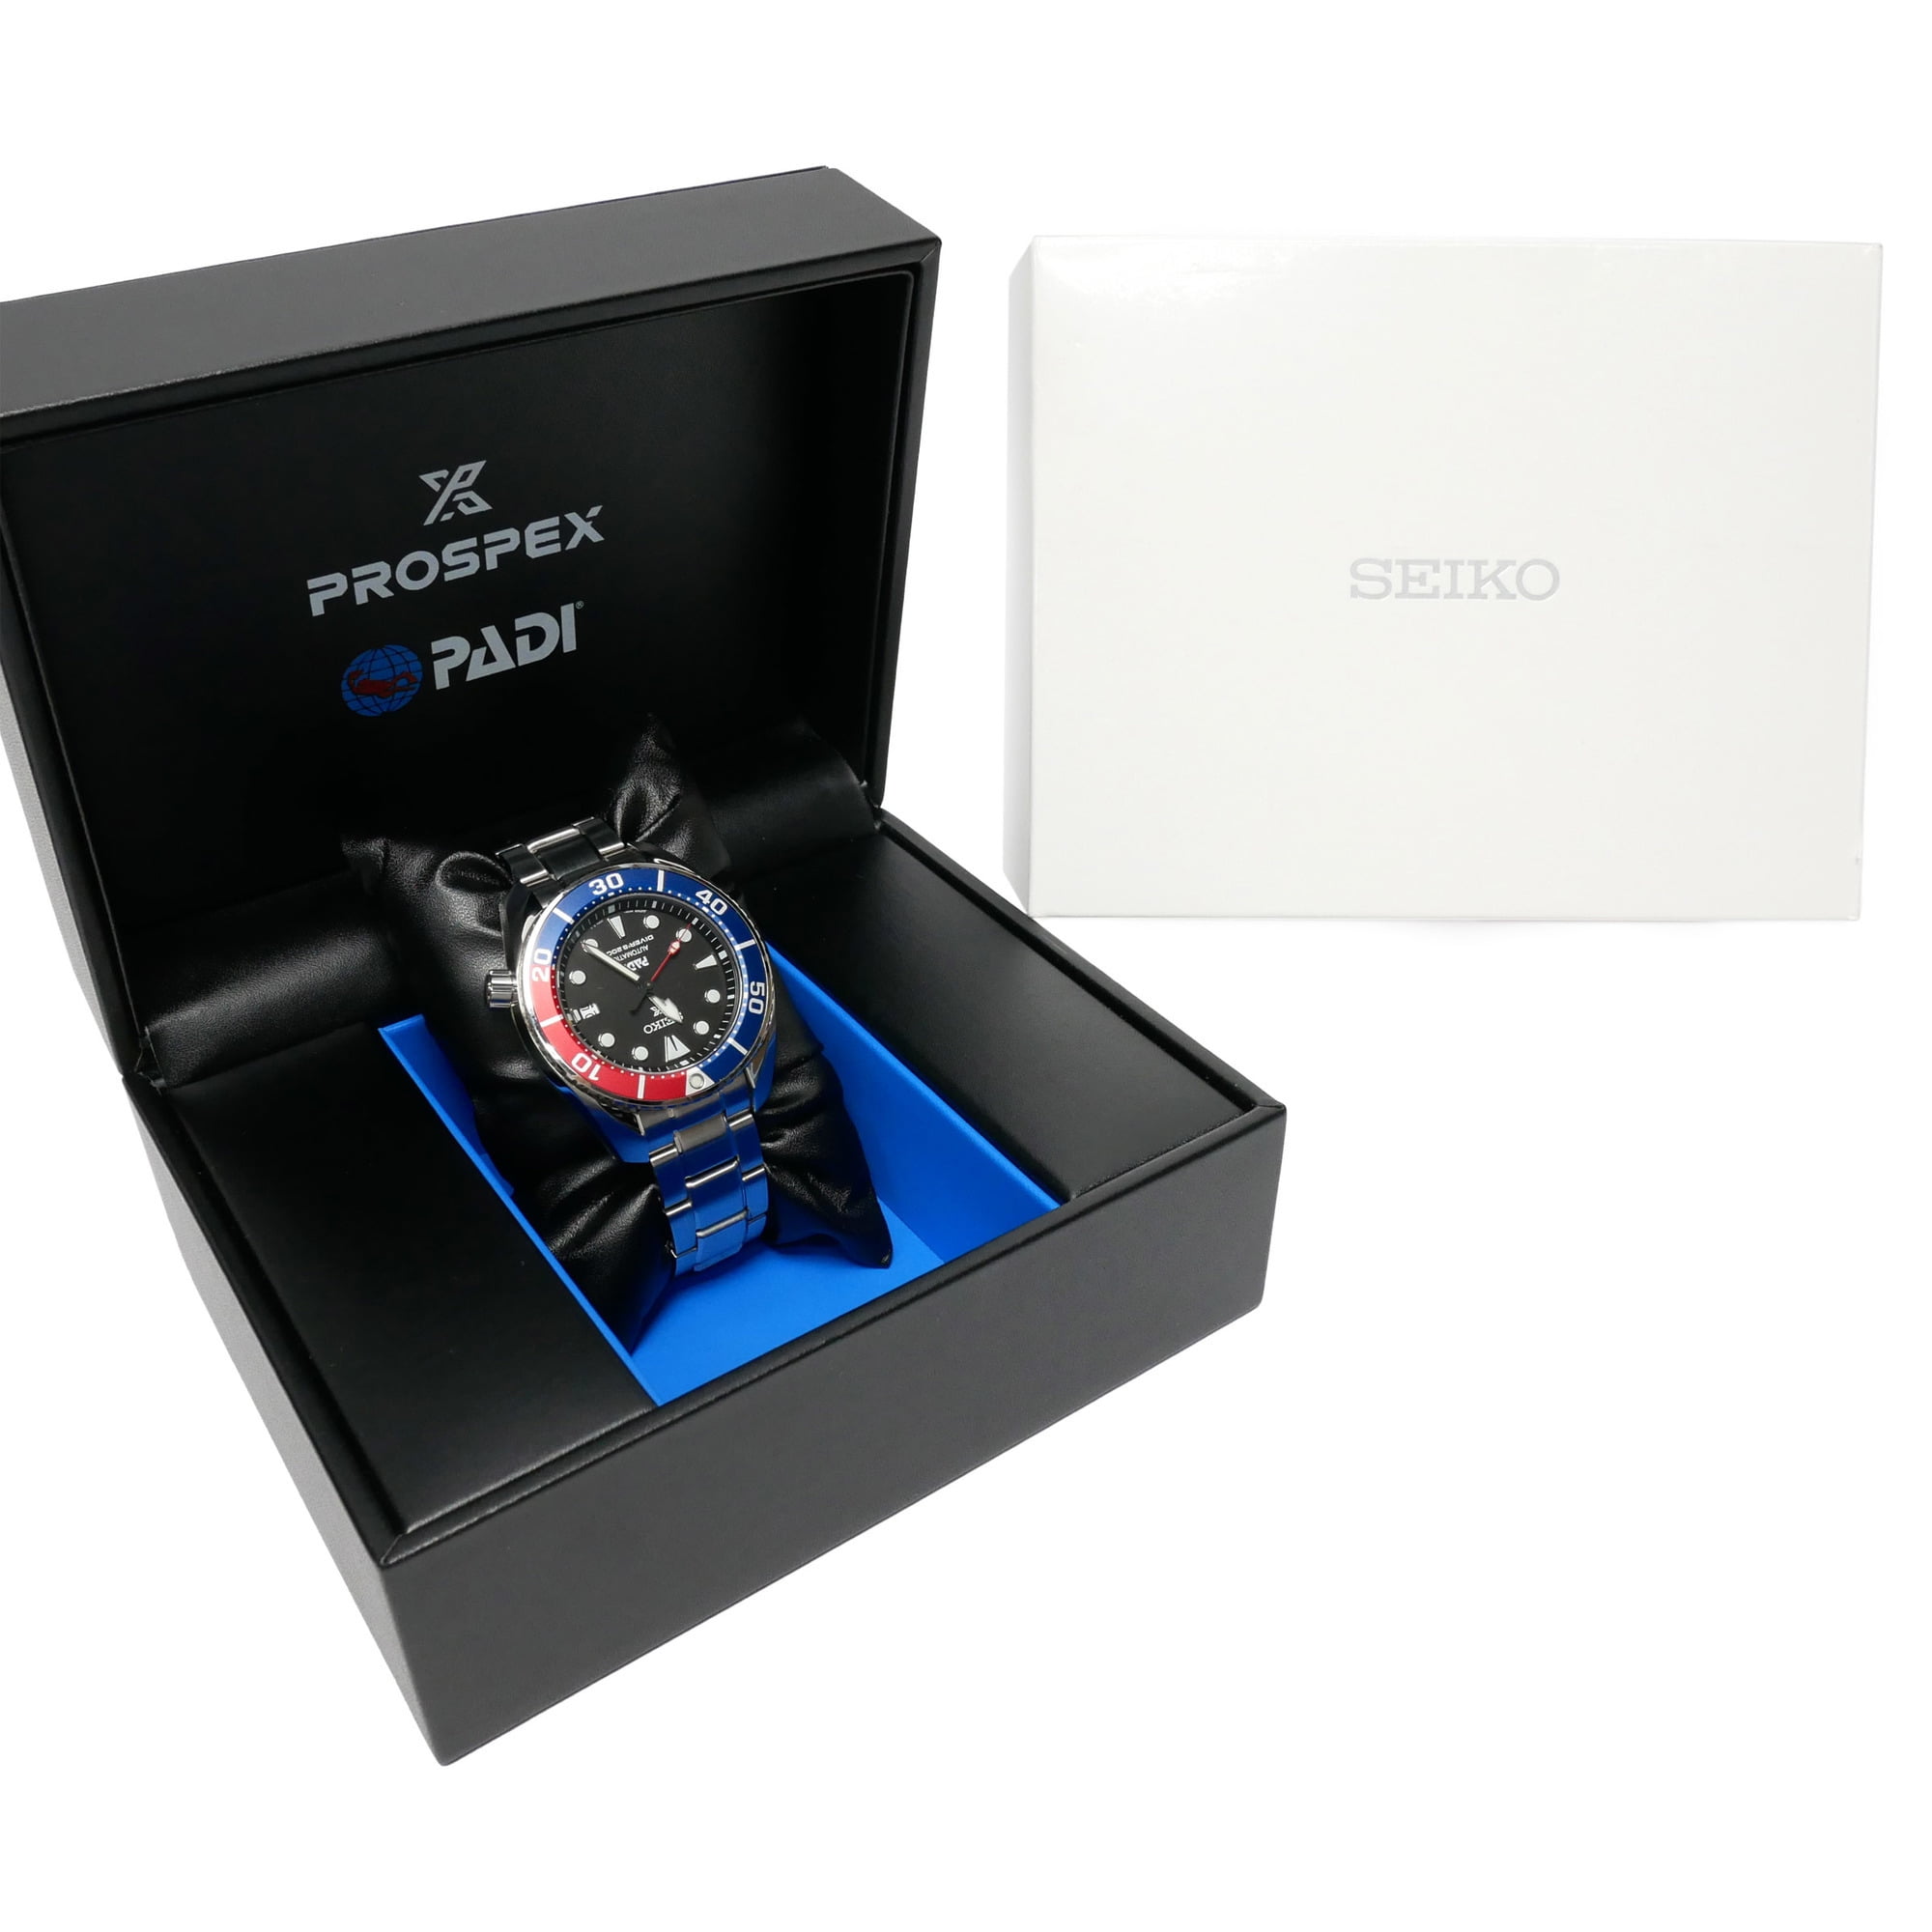 Used SEIKO Seiko Prospex Diver Scuba watch men's self-winding date display  200m diving waterproof round black dial stainless steel blue / red silver  SBDC121 